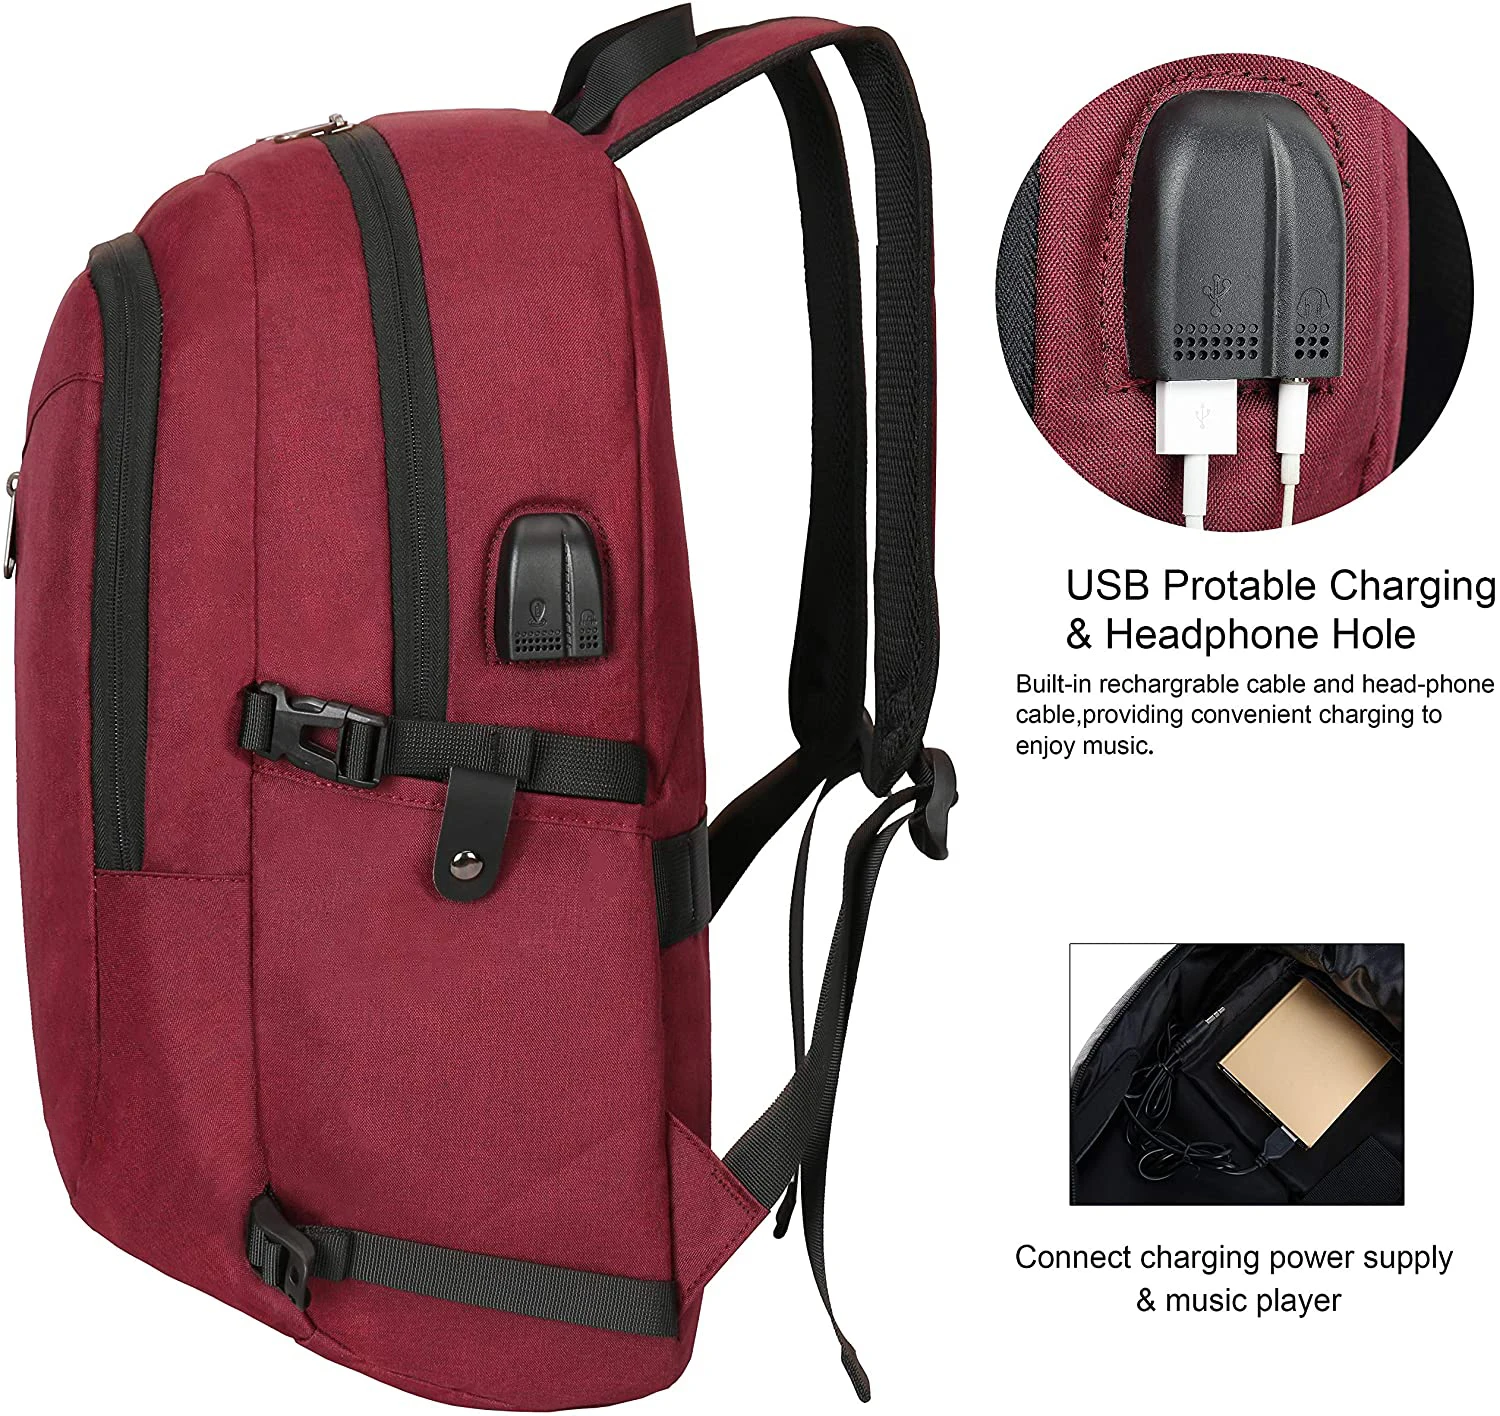 Waterproof Laptop and Tablet Business Travel Backpack